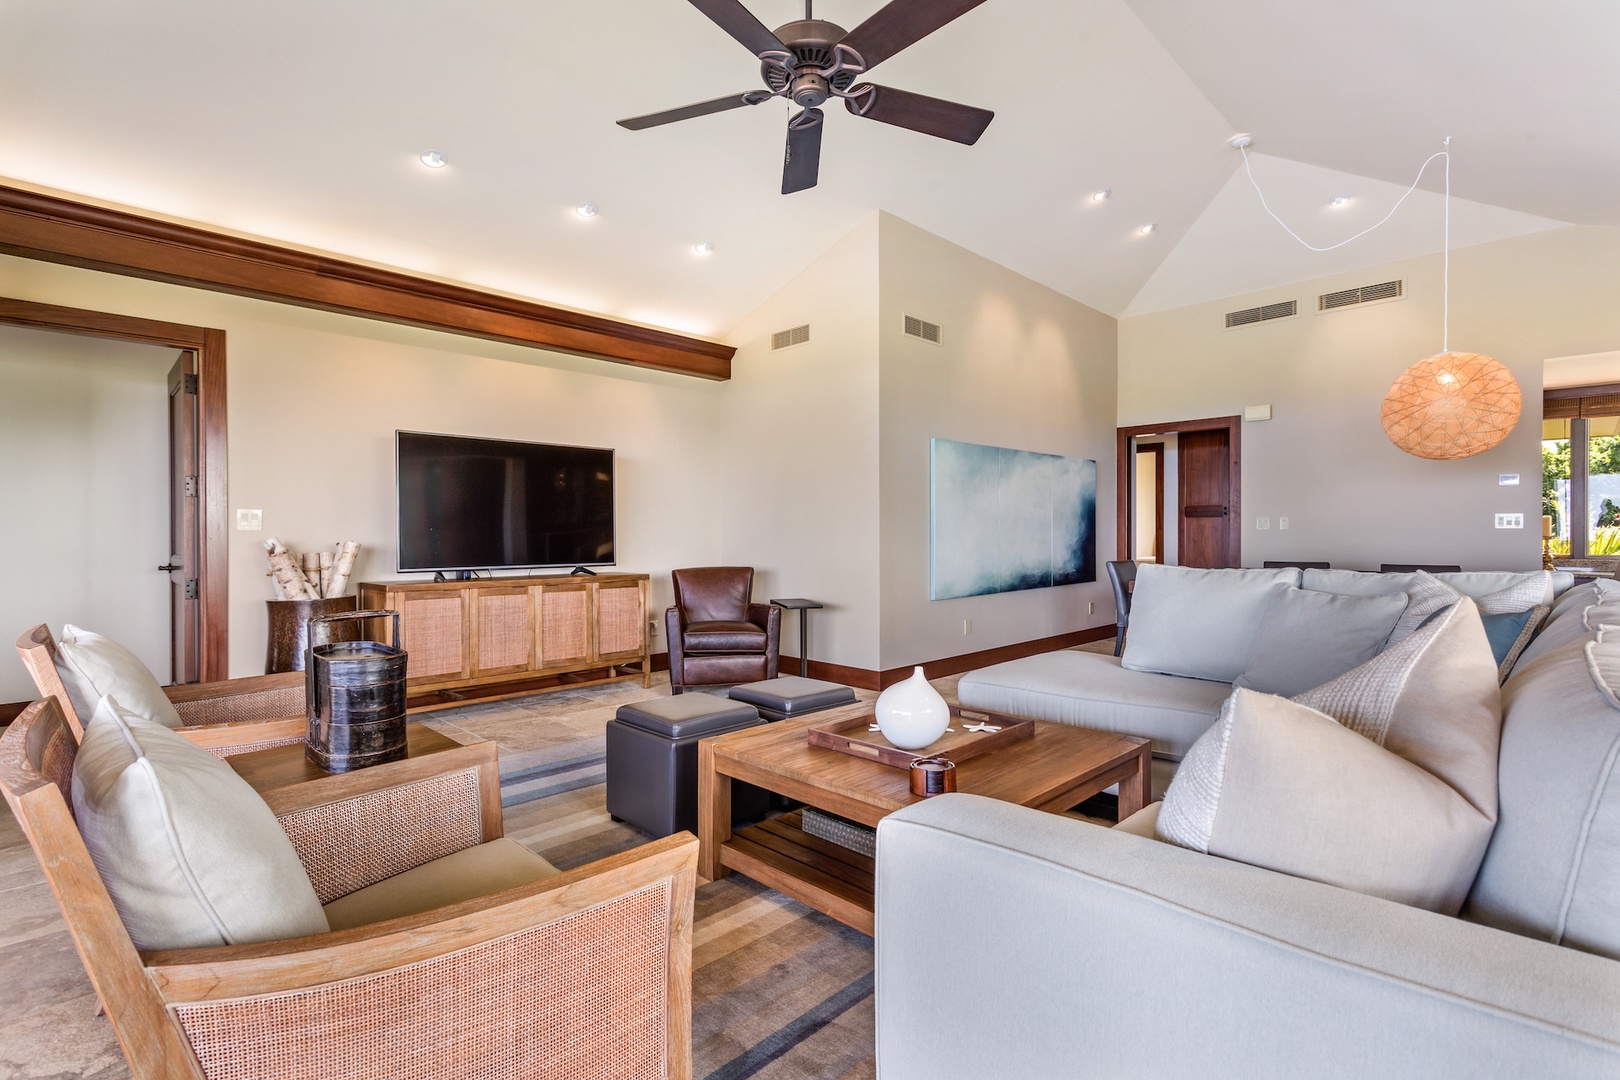 Kailua Kona Vacation Rentals, 3BD Hainoa Villa (2901D) at Four Seasons Resort at Hualalai - Vaulted ceilings and recessed lighting in the spacious living area.